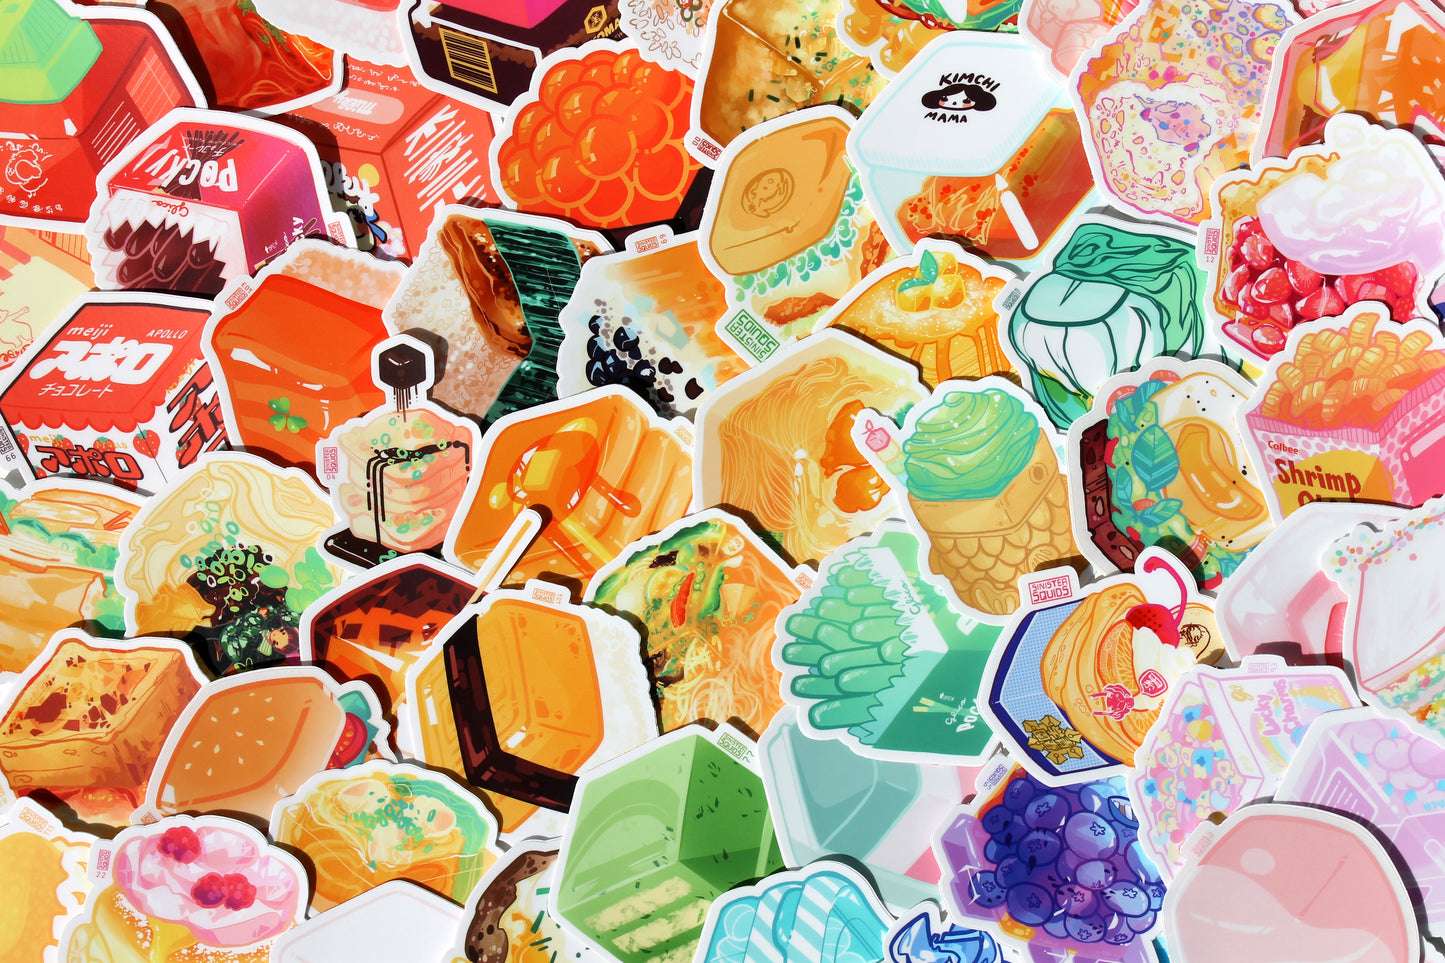 literally every food cube sticker I have (88+ pcs)